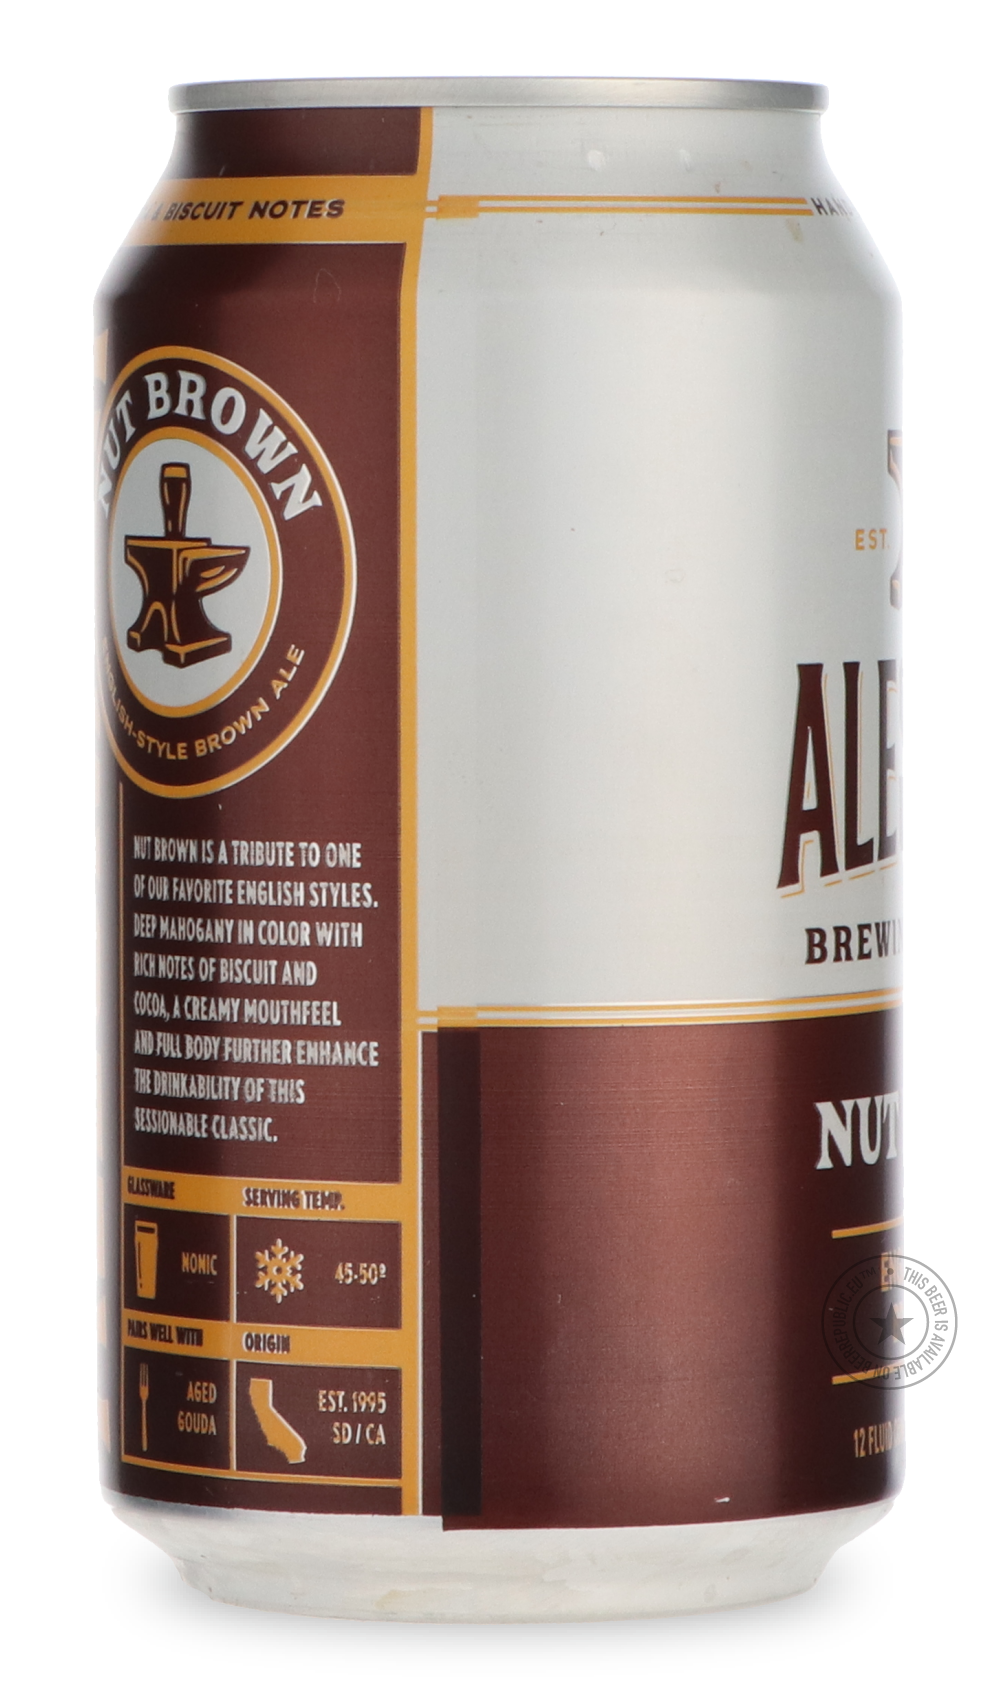 -AleSmith- Nut Brown Ale-Brown & Dark- Only @ Beer Republic - The best online beer store for American & Canadian craft beer - Buy beer online from the USA and Canada - Bier online kopen - Amerikaans bier kopen - Craft beer store - Craft beer kopen - Amerikanisch bier kaufen - Bier online kaufen - Acheter biere online - IPA - Stout - Porter - New England IPA - Hazy IPA - Imperial Stout - Barrel Aged - Barrel Aged Imperial Stout - Brown - Dark beer - Blond - Blonde - Pilsner - Lager - Wheat - Weizen - Amber -